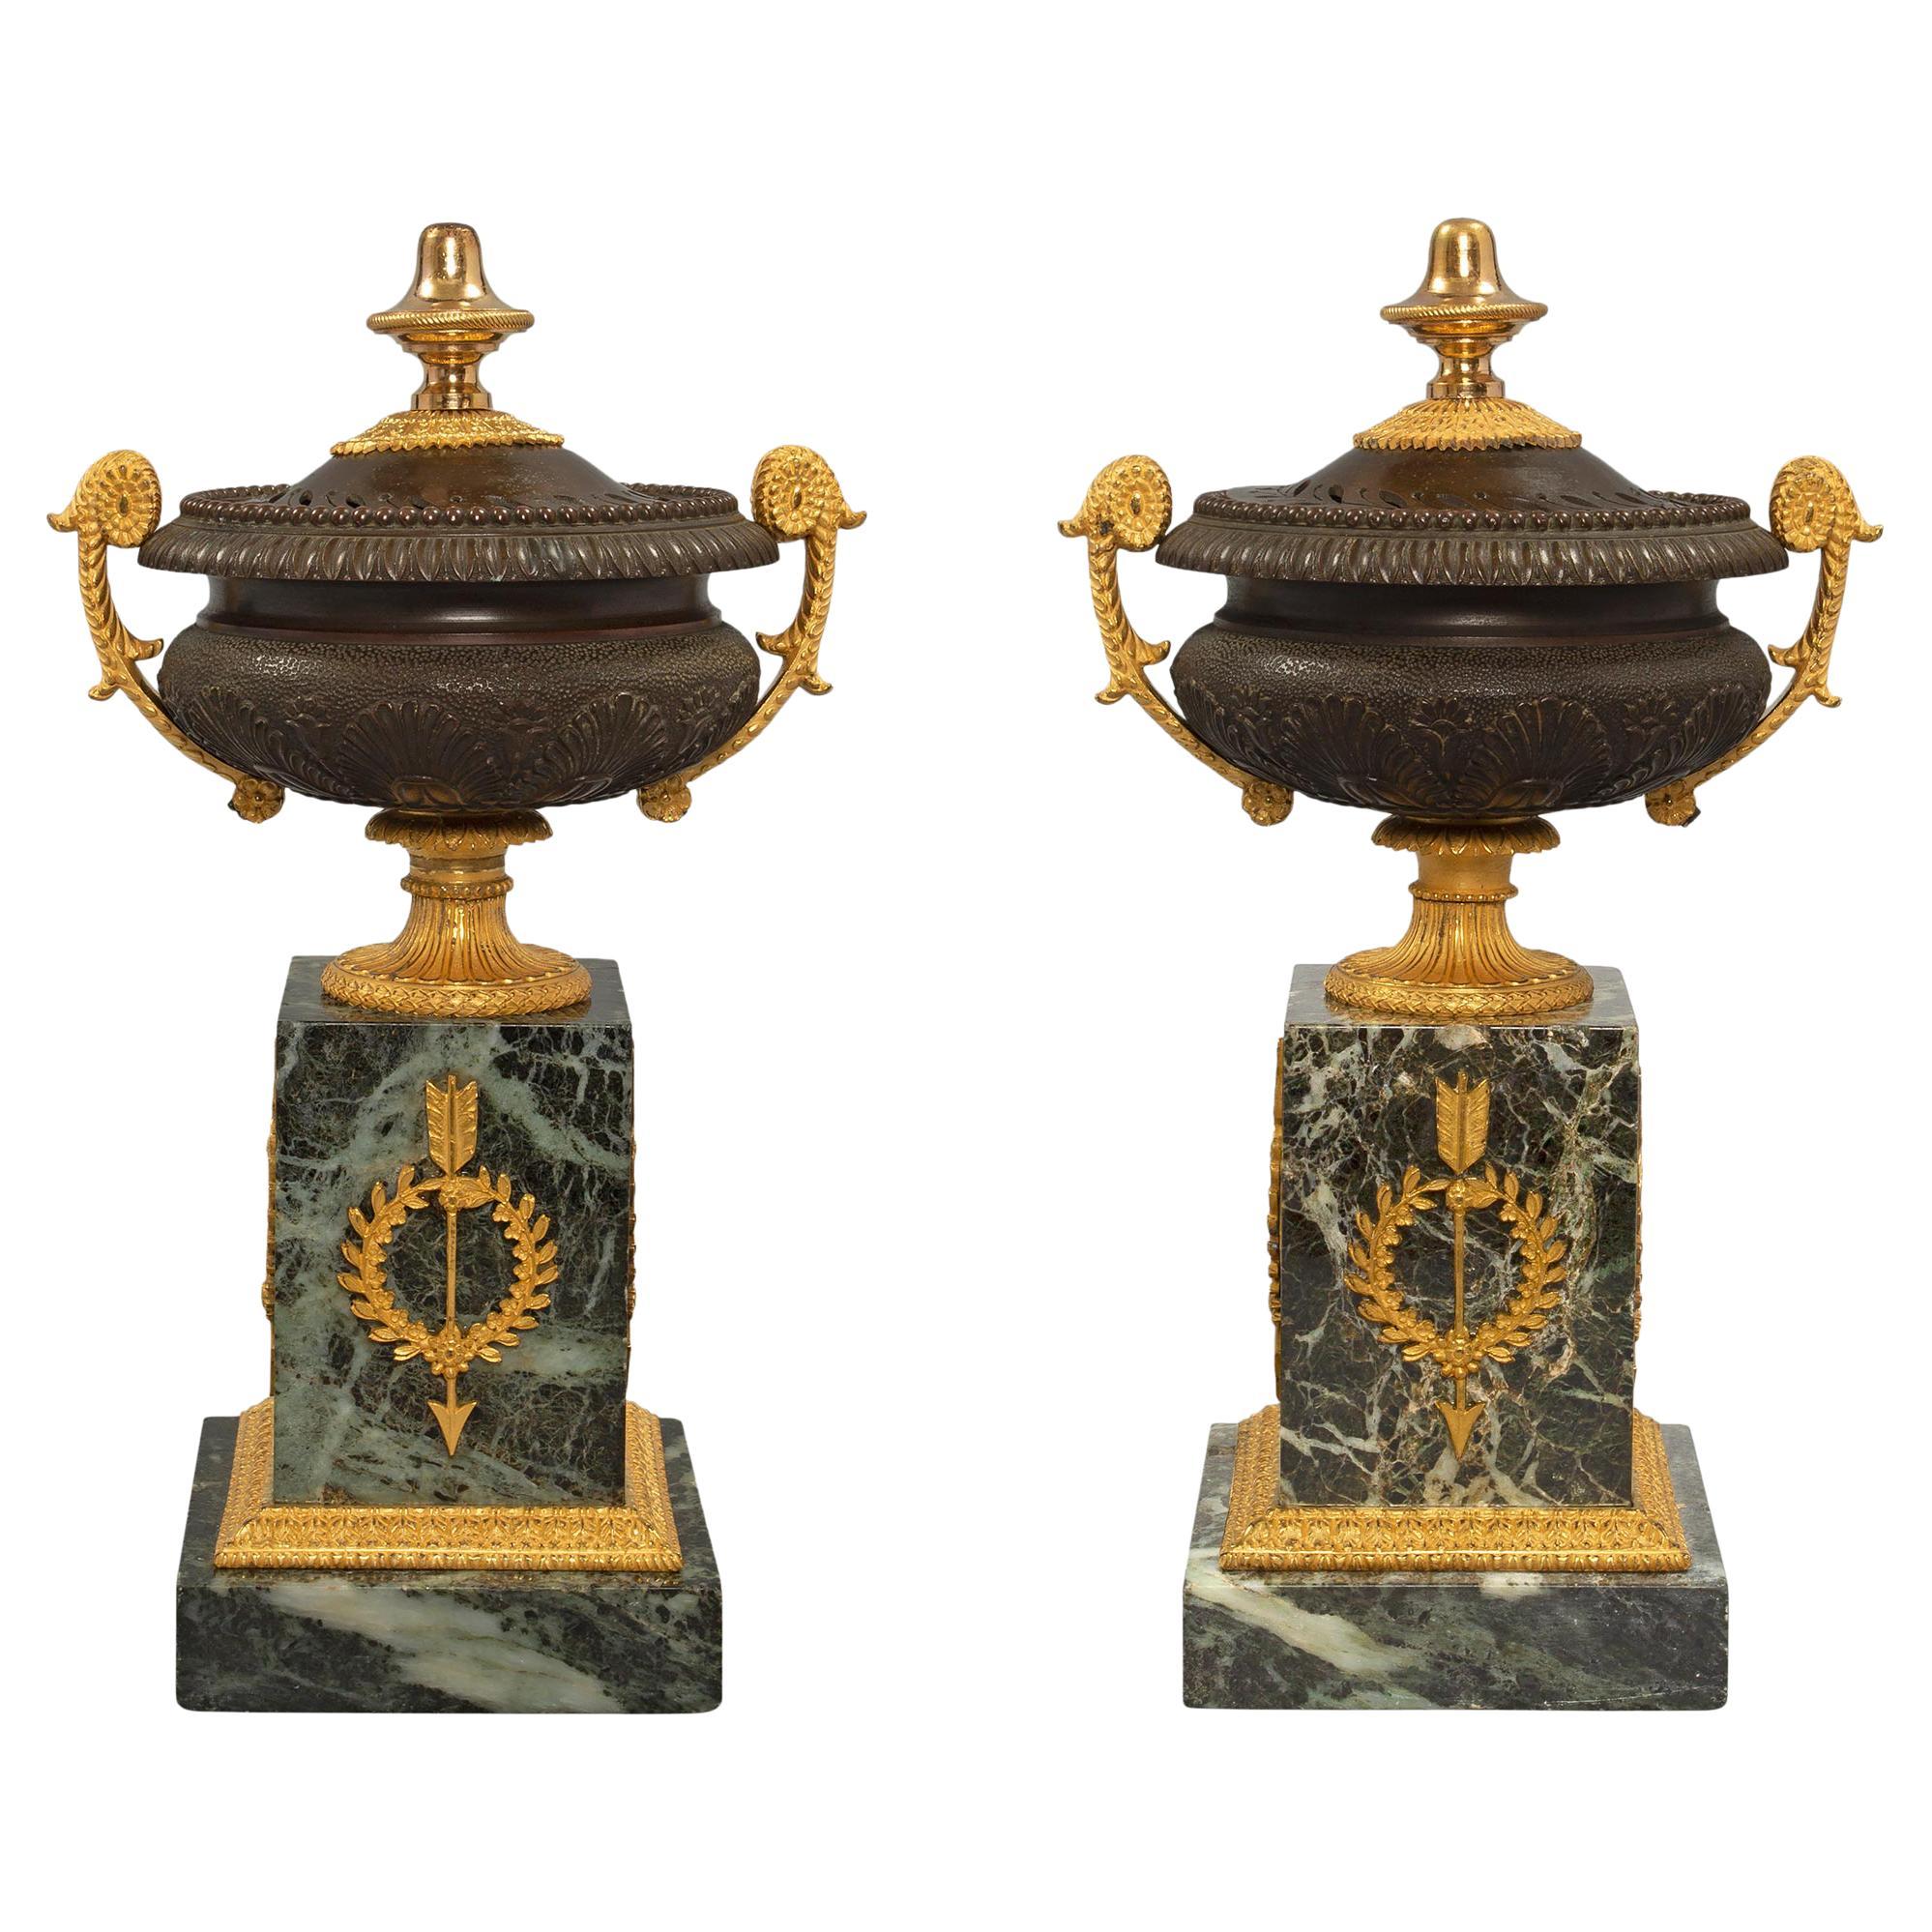 Pair of French 19th Century Charles X Style Bronze and Marble Pot Pourri Urns